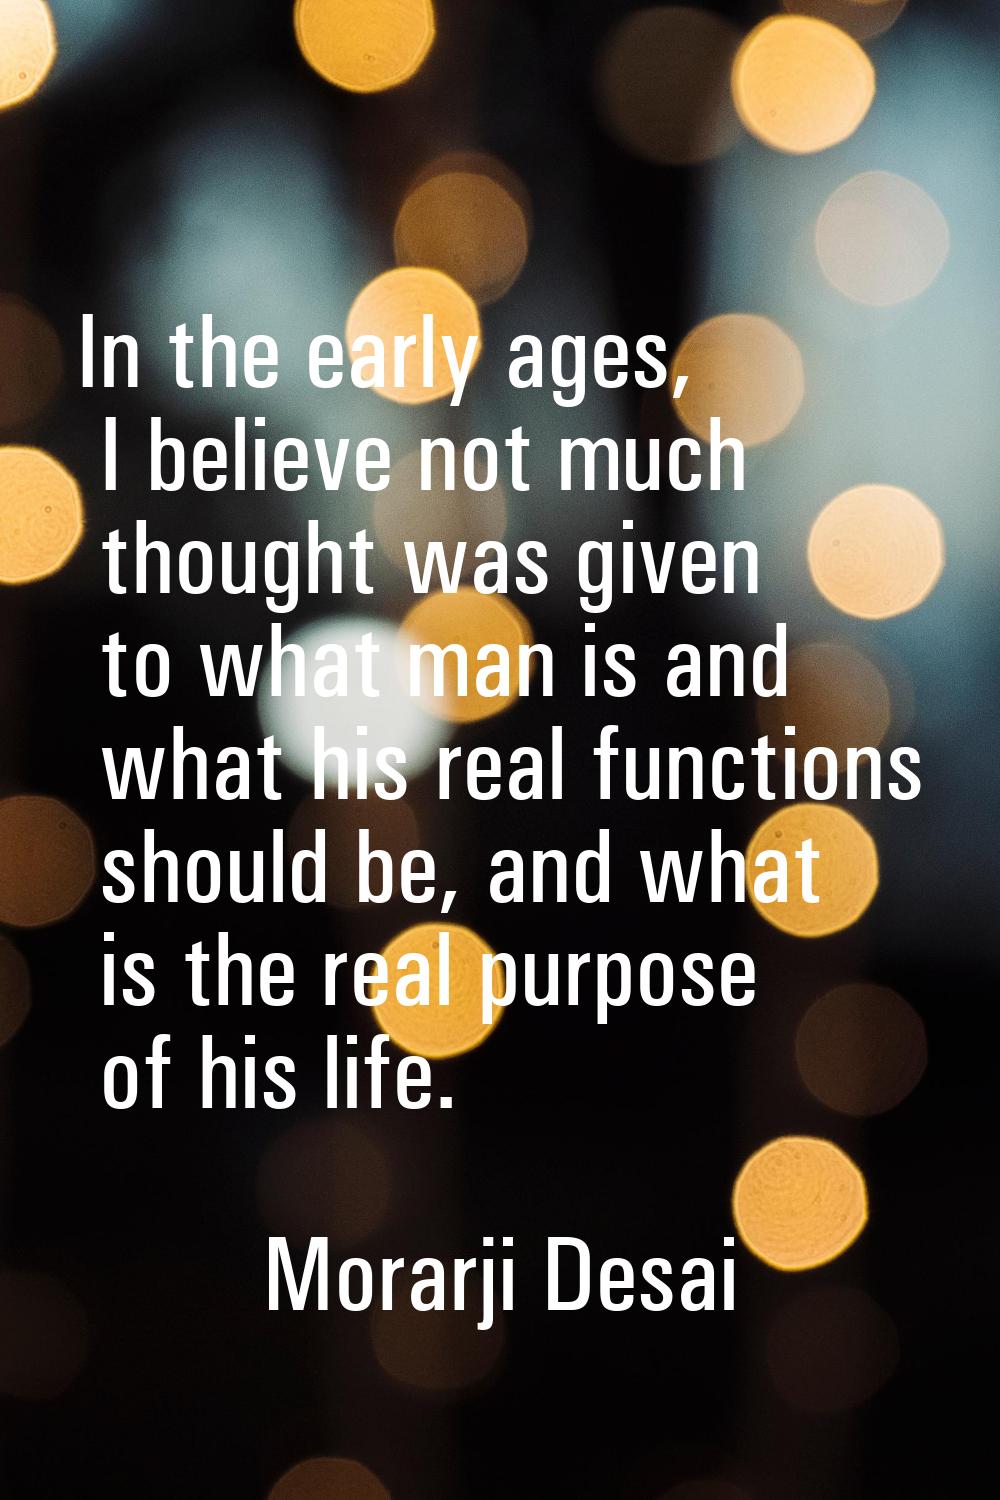 In the early ages, I believe not much thought was given to what man is and what his real functions 